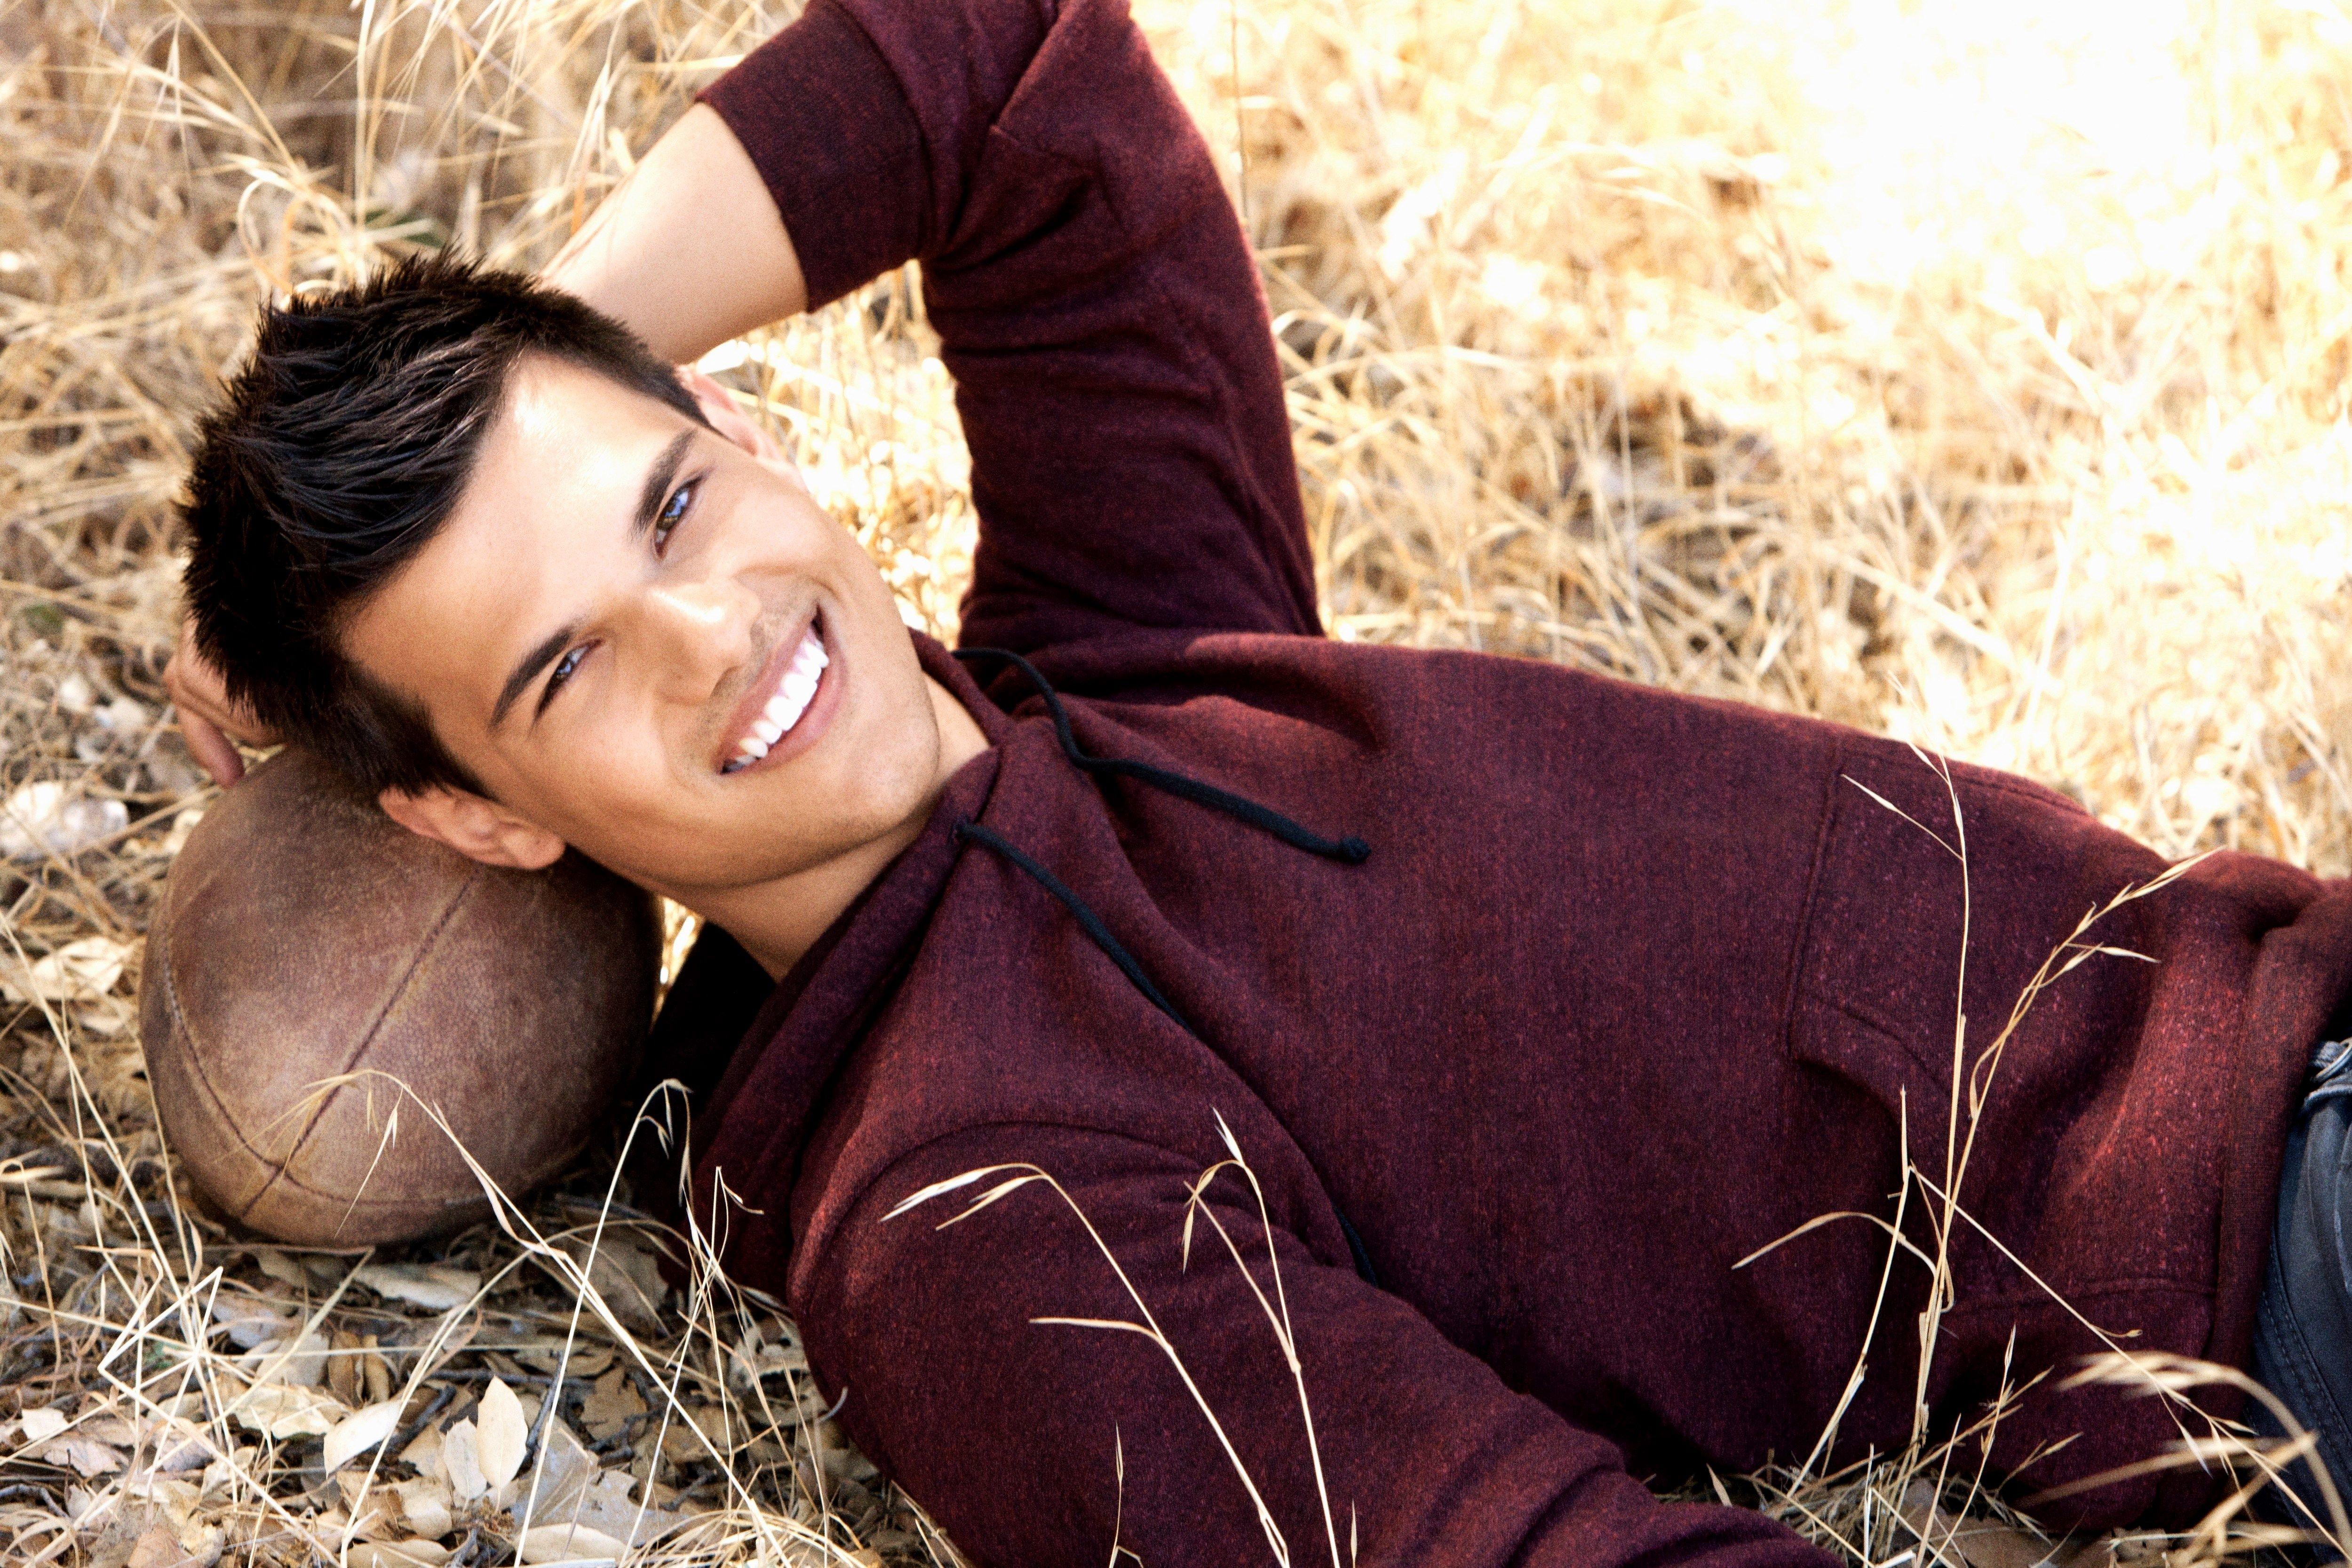 gallery for image HD taylor lautner in high res. sharovarka